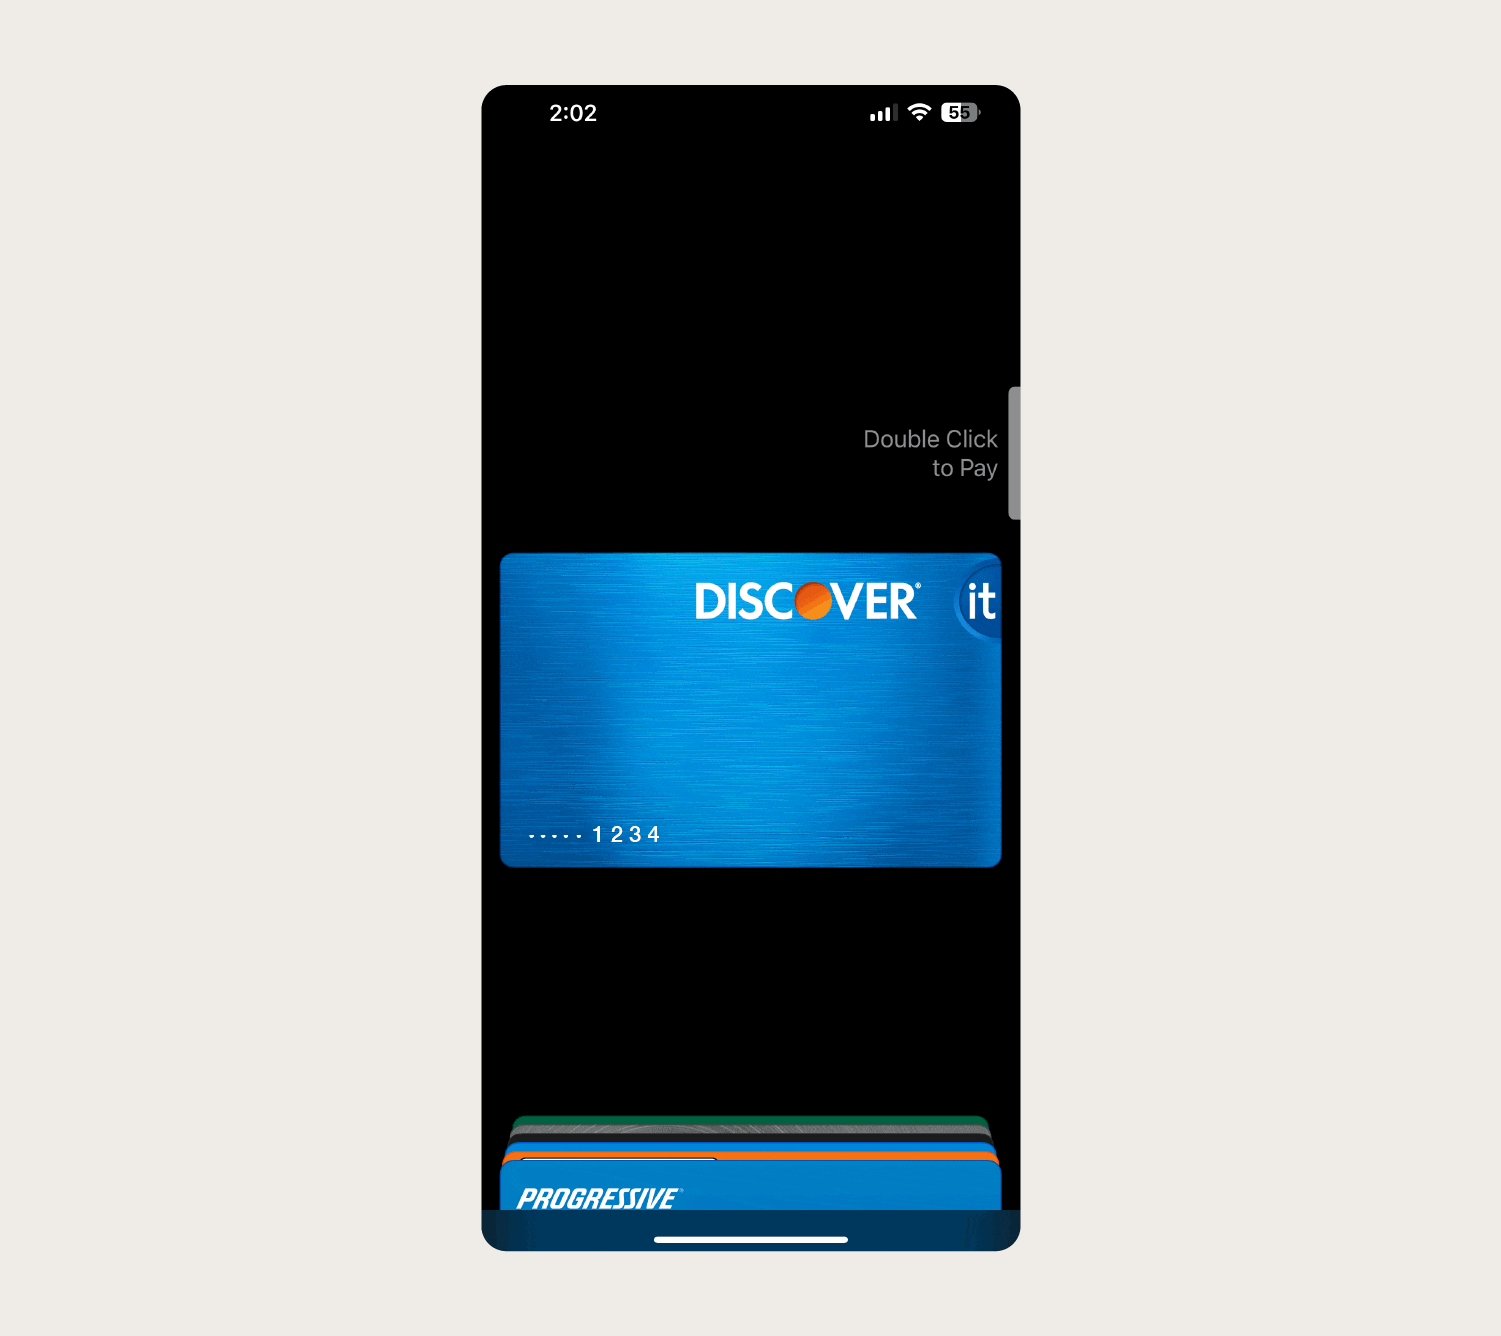 A series of visuals showing how to switch between cards in your Apple Wallet.